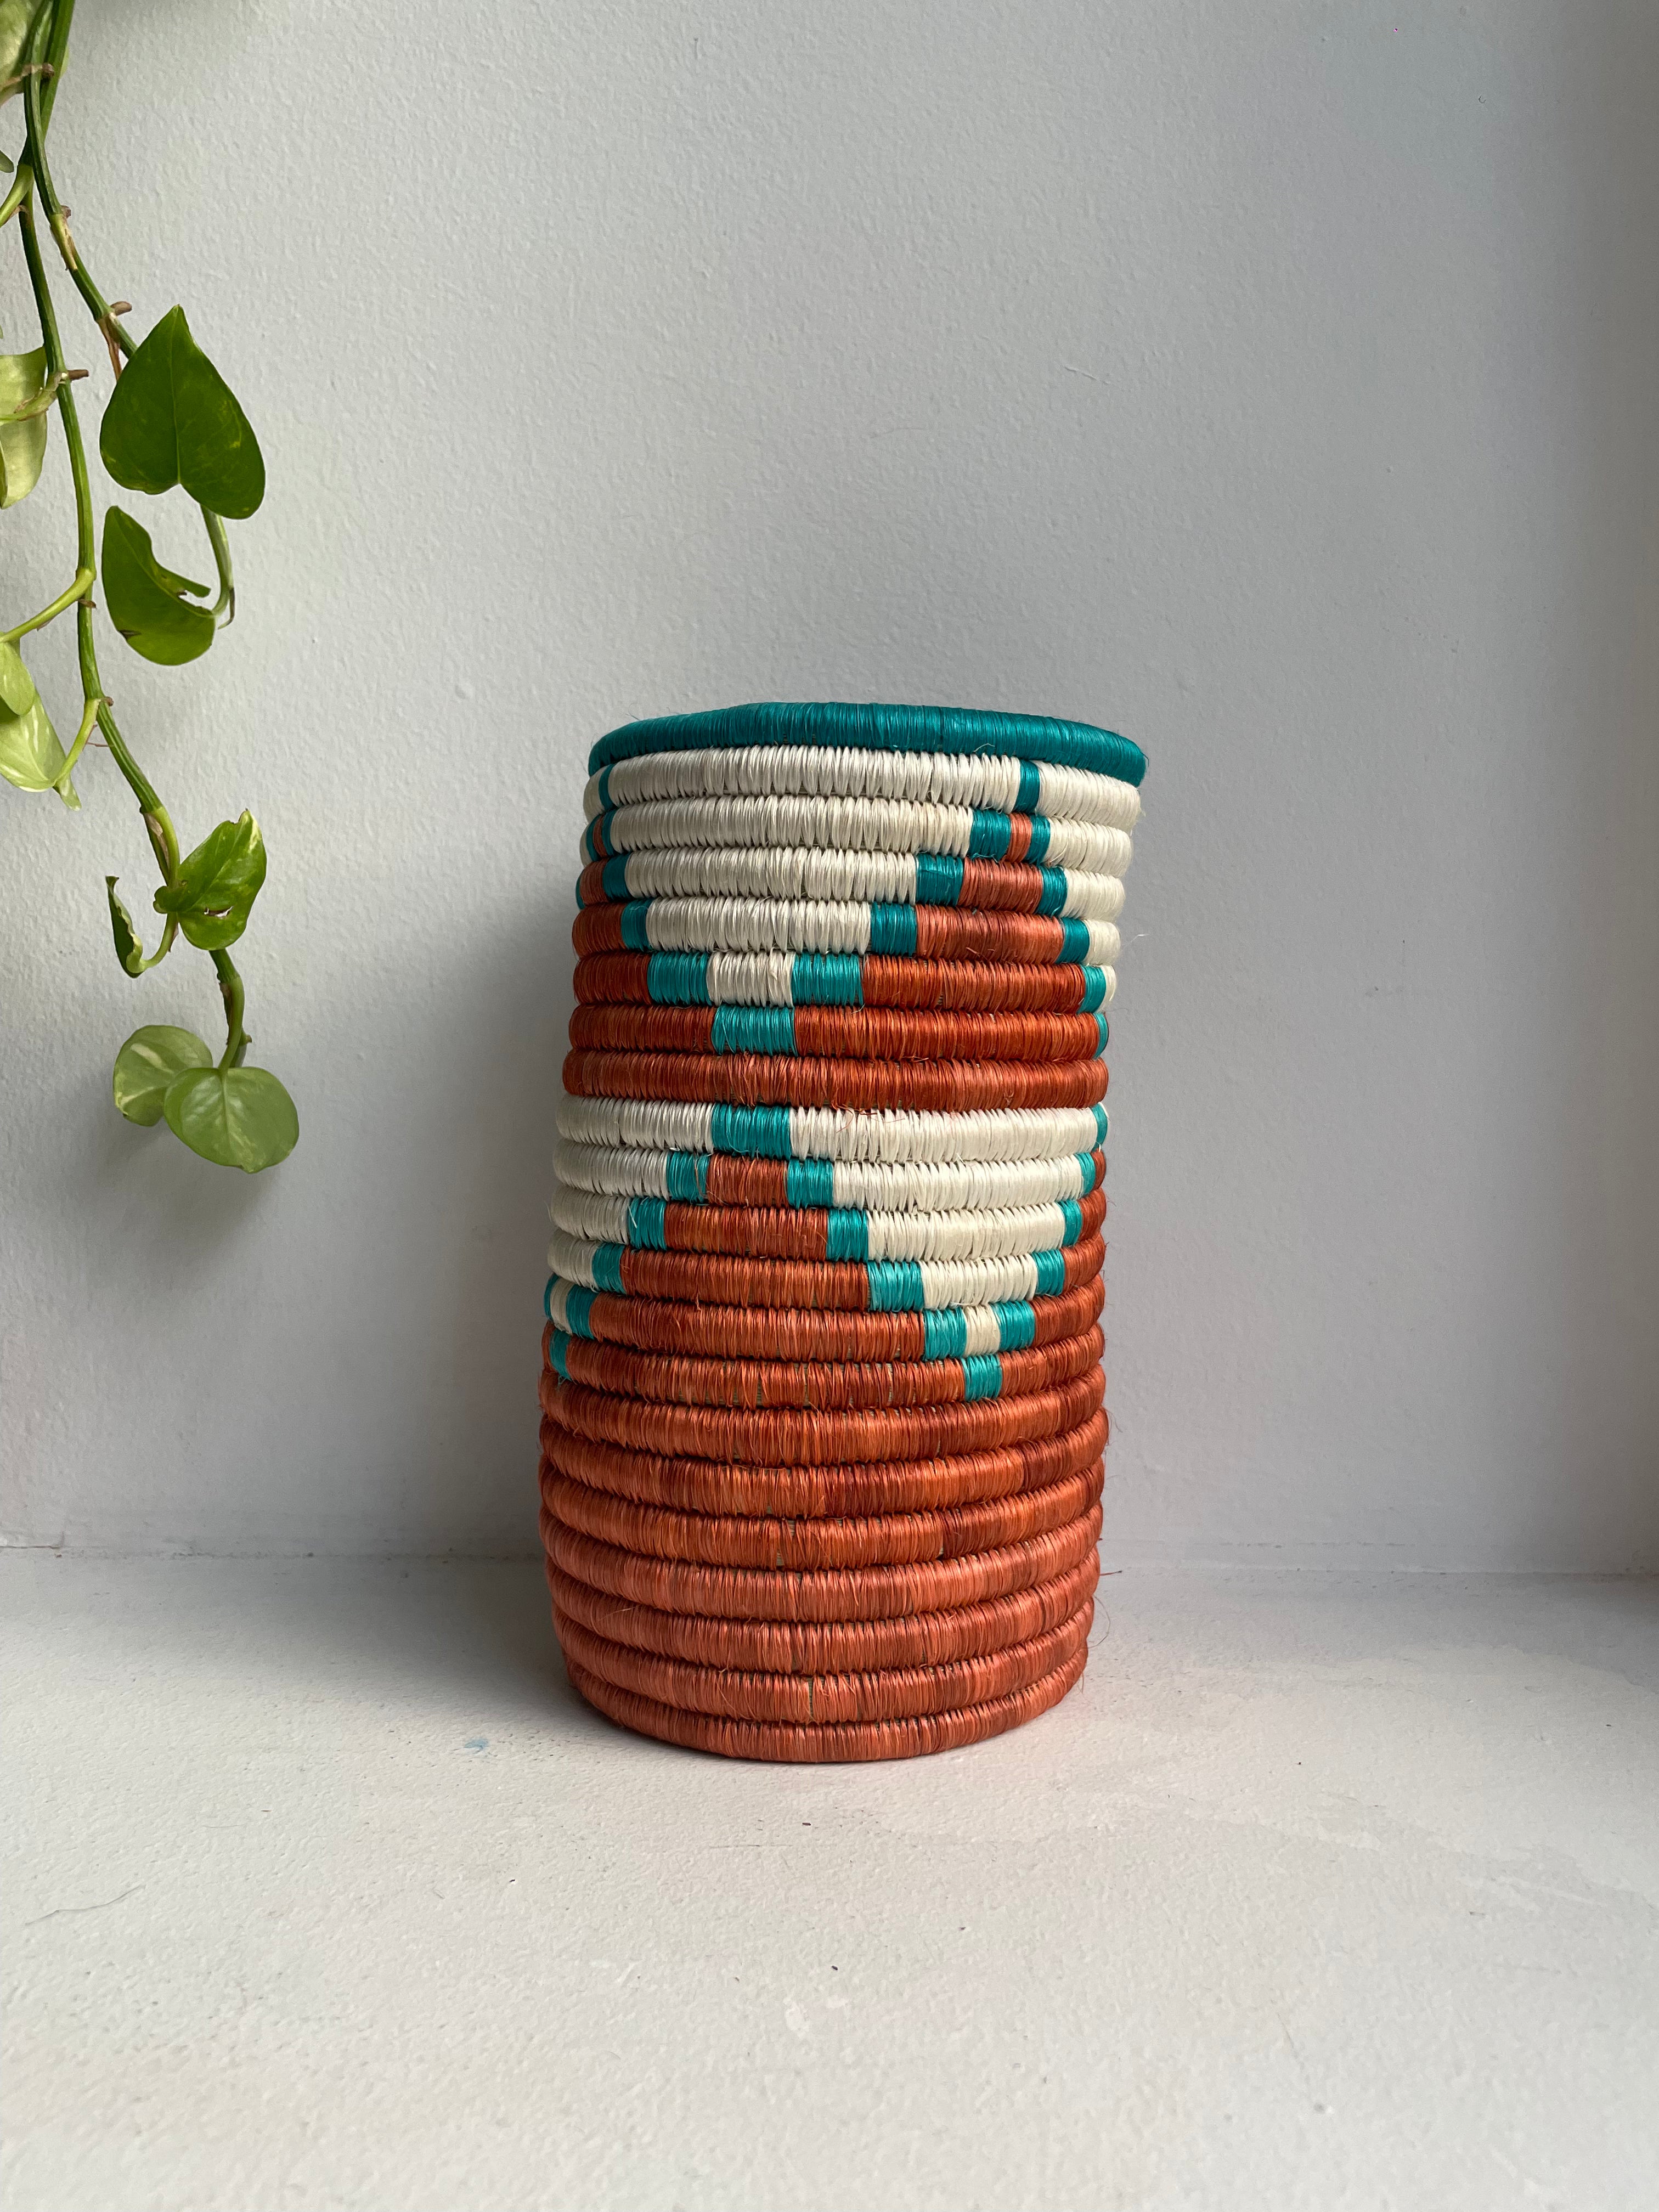 Display of brown, white and aqua triangle vase